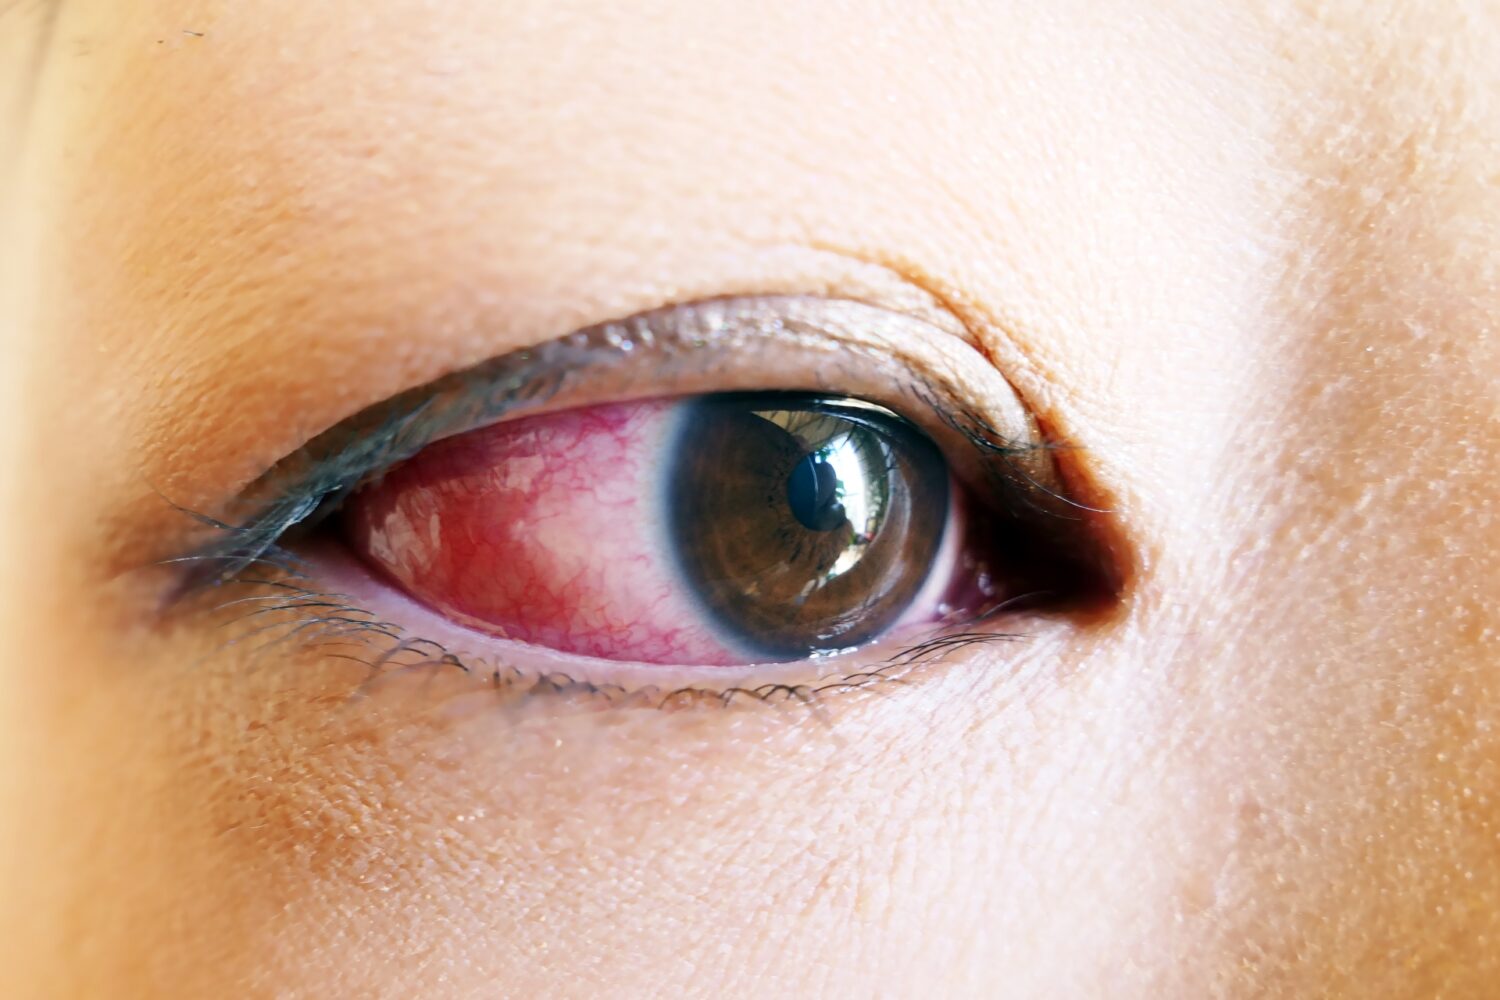 Subconjunctival Hemorrhage: Odd Bloody Stains in the Eyes - The DailyMoss